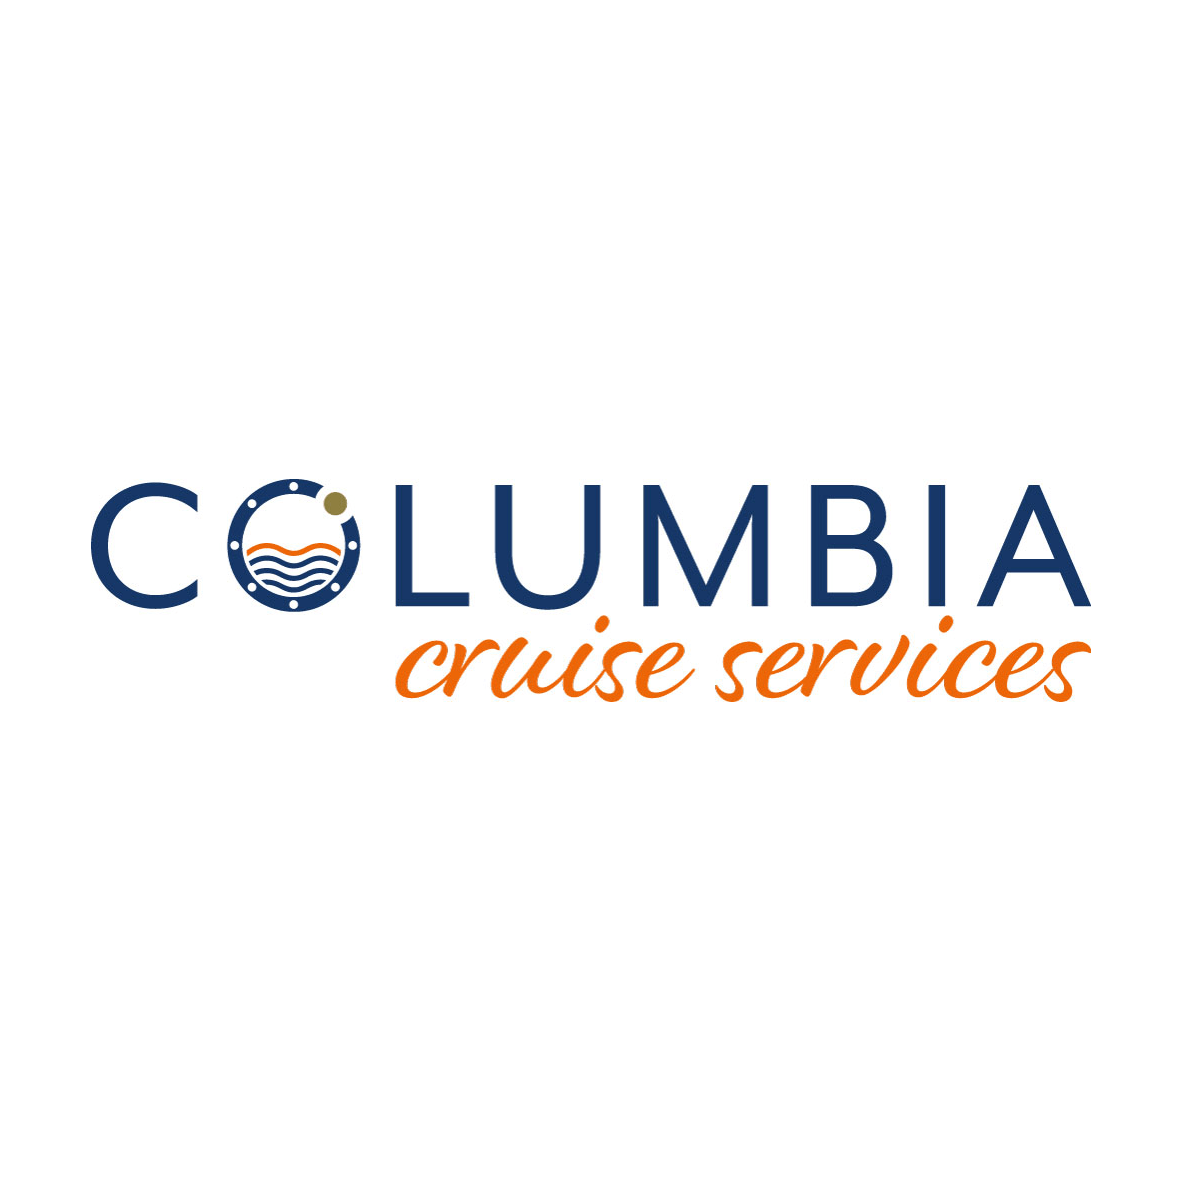 You are currently viewing Leisure group COLUMBIA blue unifies visual identity and branding while delivering exceptional service